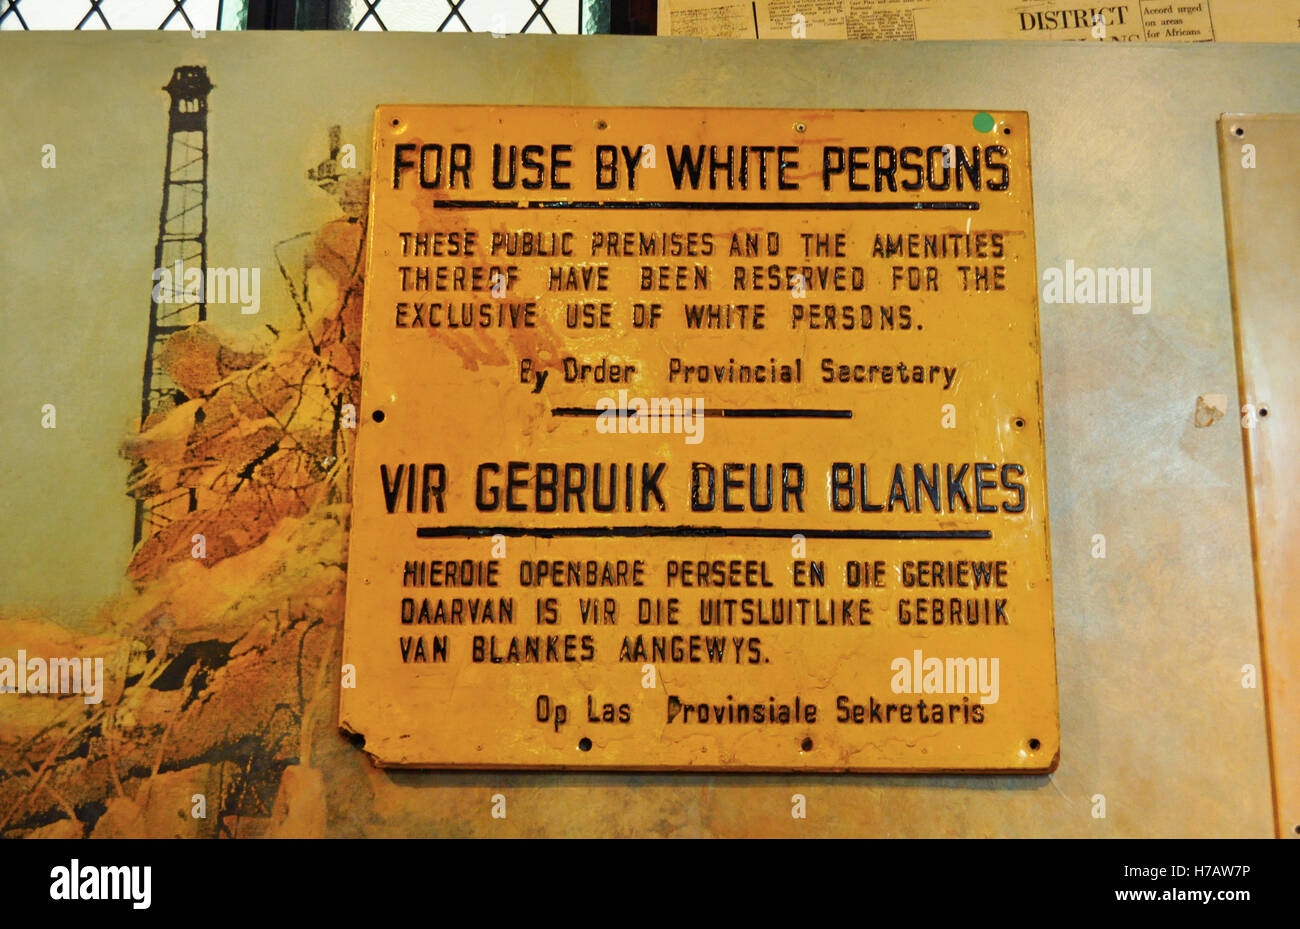 Cape Town, District Six Museum: an old sign For use by white persons used after the forced removal of the District Six inhabitants Stock Photo